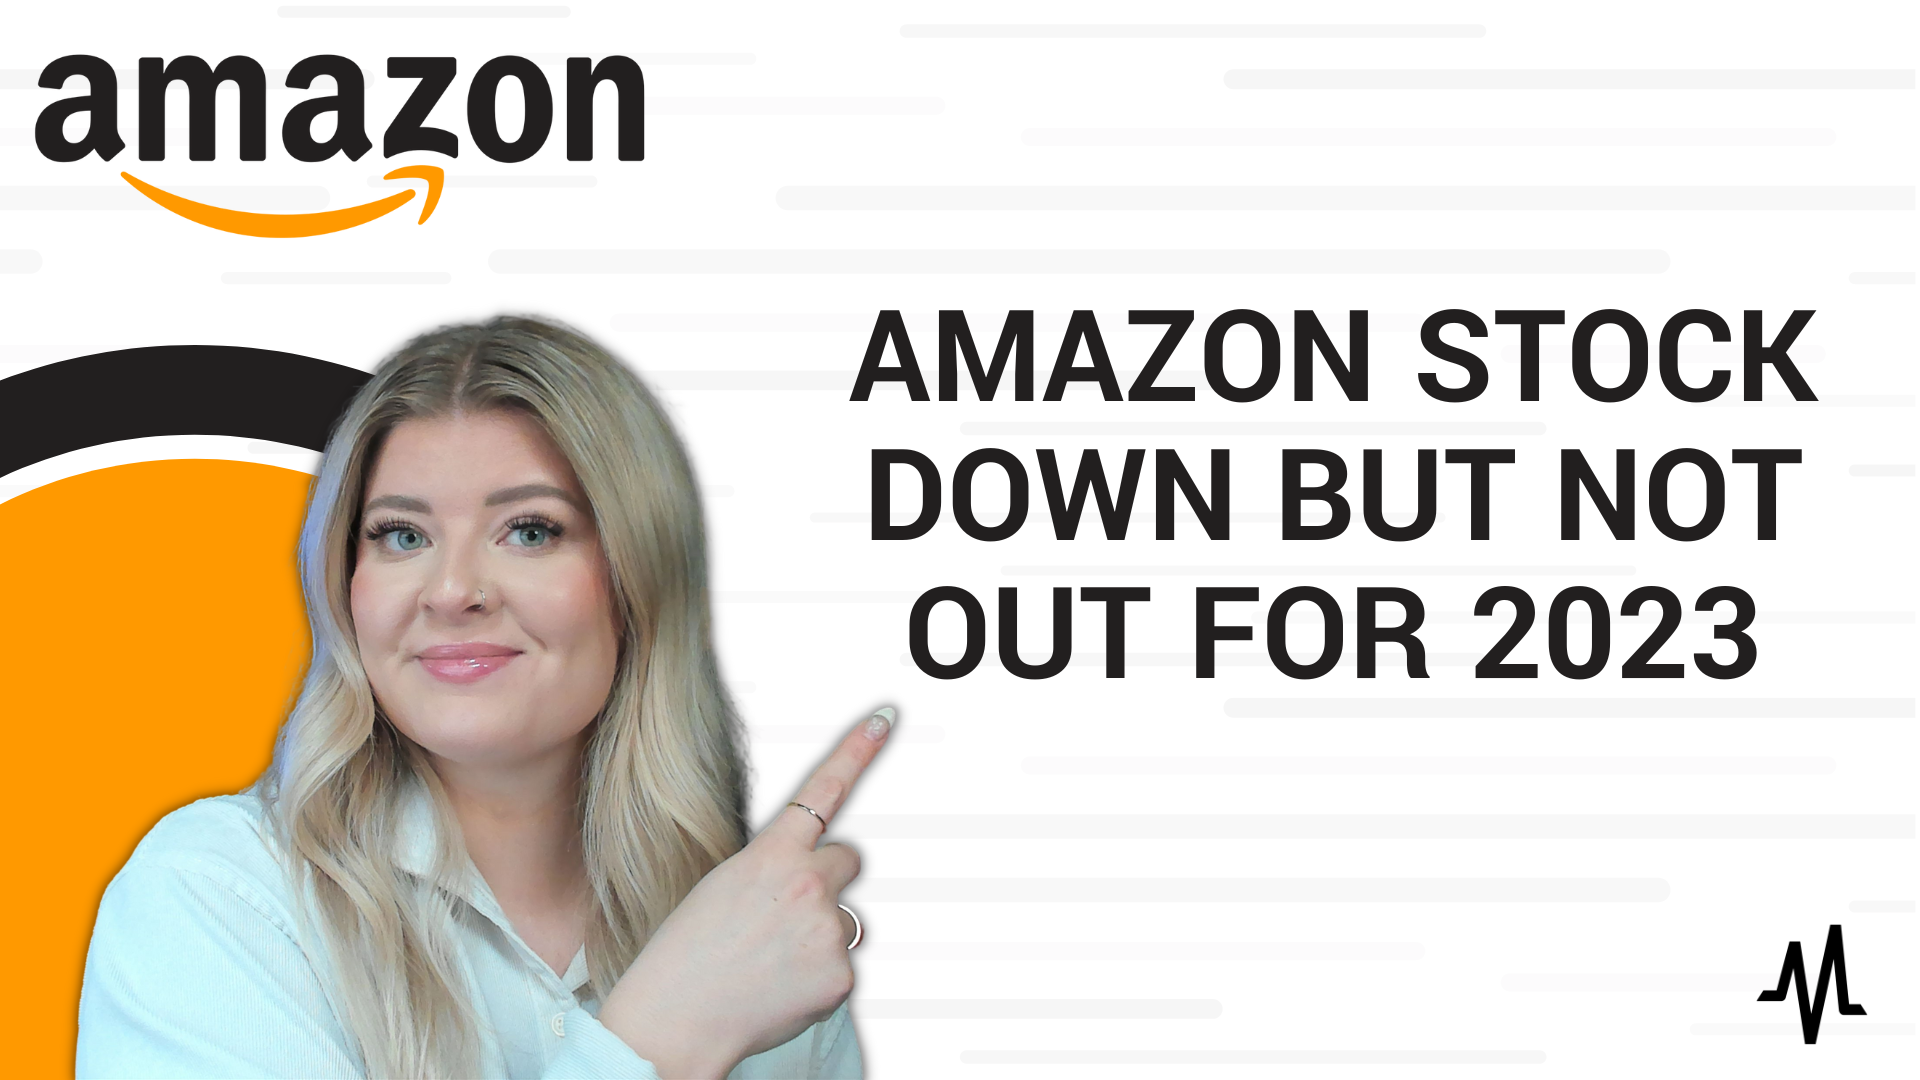 Amazon Stock Down But Not Out For 2023